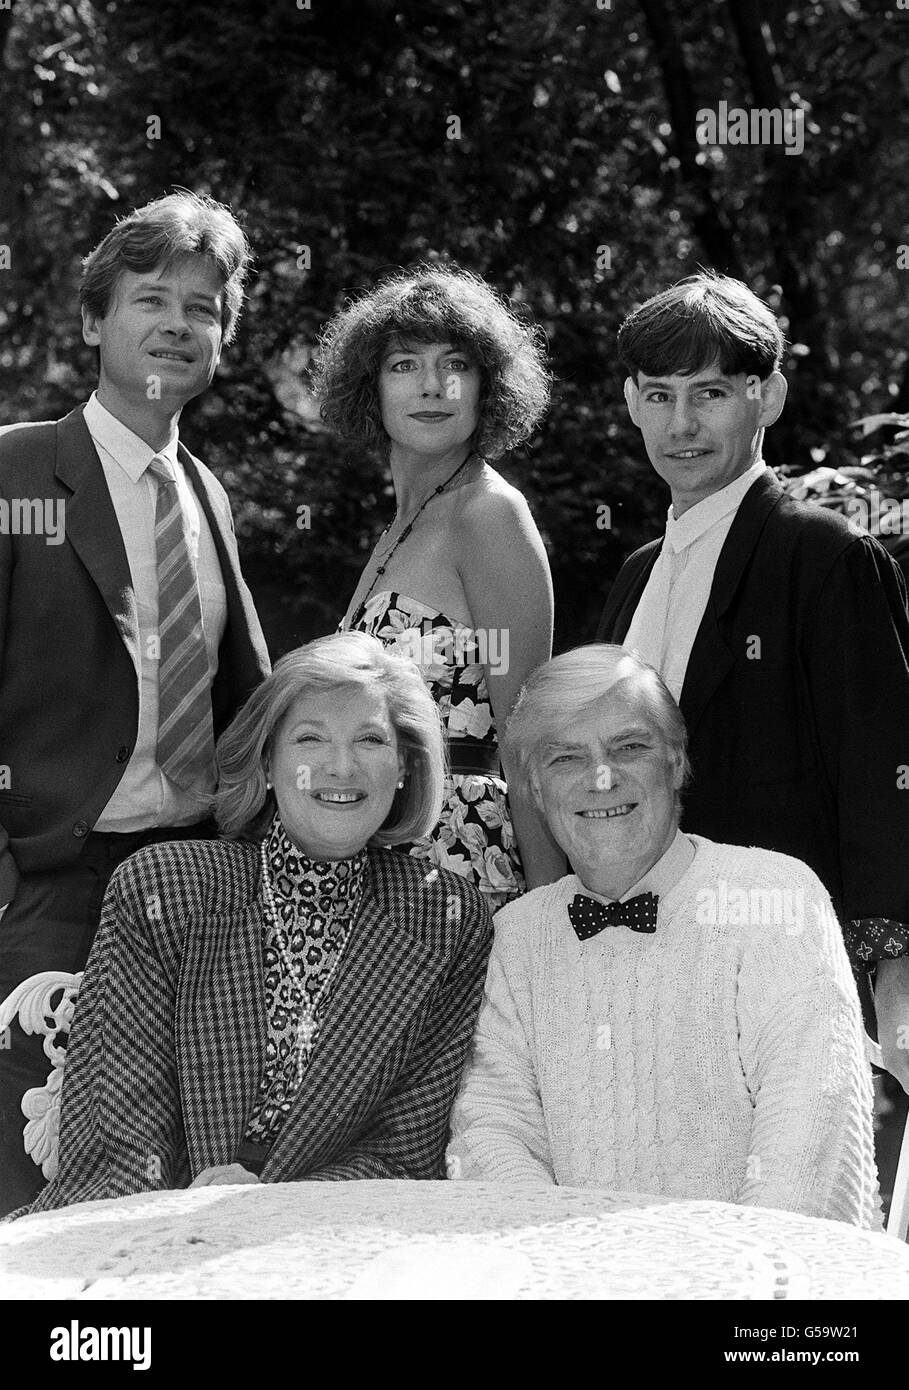 The main stars of 'The Bretts', a 11 part saga from Central Television set in the roaring twenties, which follows the fortunesand failures of an illustrious theatrical family and their house servants. Norman Rodway (seated right) stars as Charles Brett, Barbara Murray (seated) plays his wife Lydia Wheatley; they have five children, including (from left) twins Edwin (David Yelland) and Martha (Belinda Lang); and Thomas (George Winter.) Stock Photo